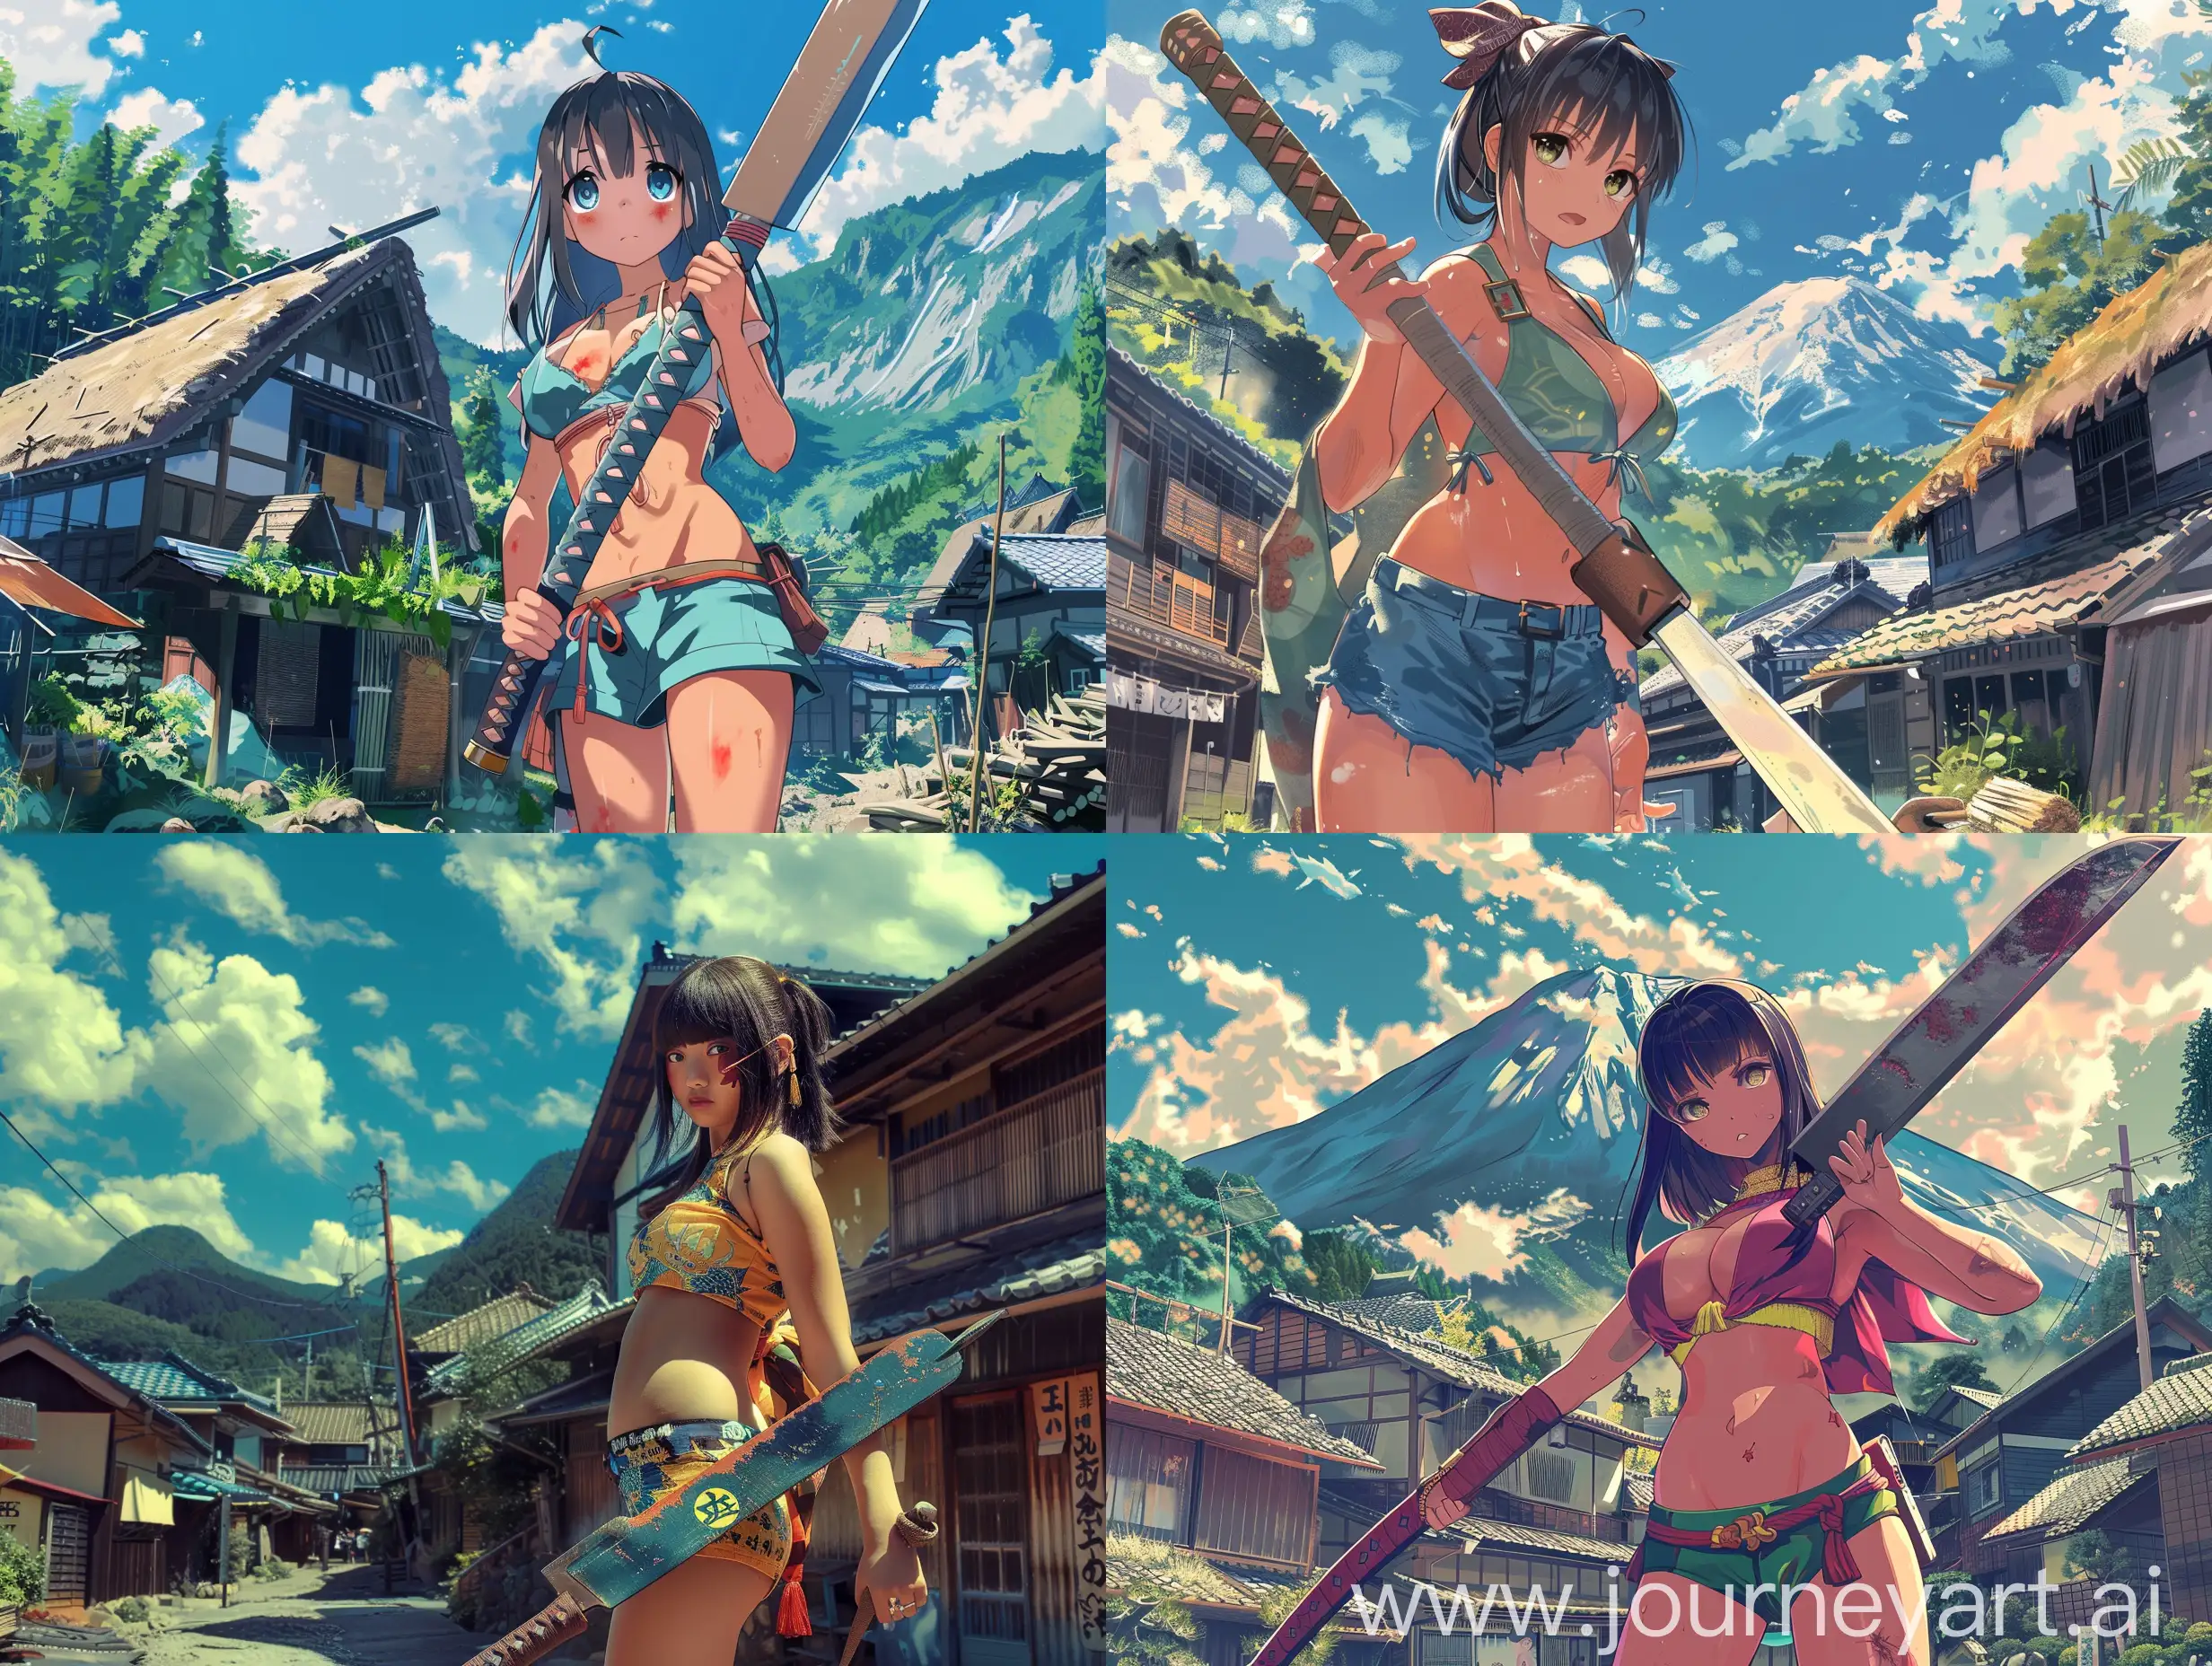 Background Mountain. İn The sky 
 realistic Dragon color azure.A low-cut Japanese girl holding a big machete in a village